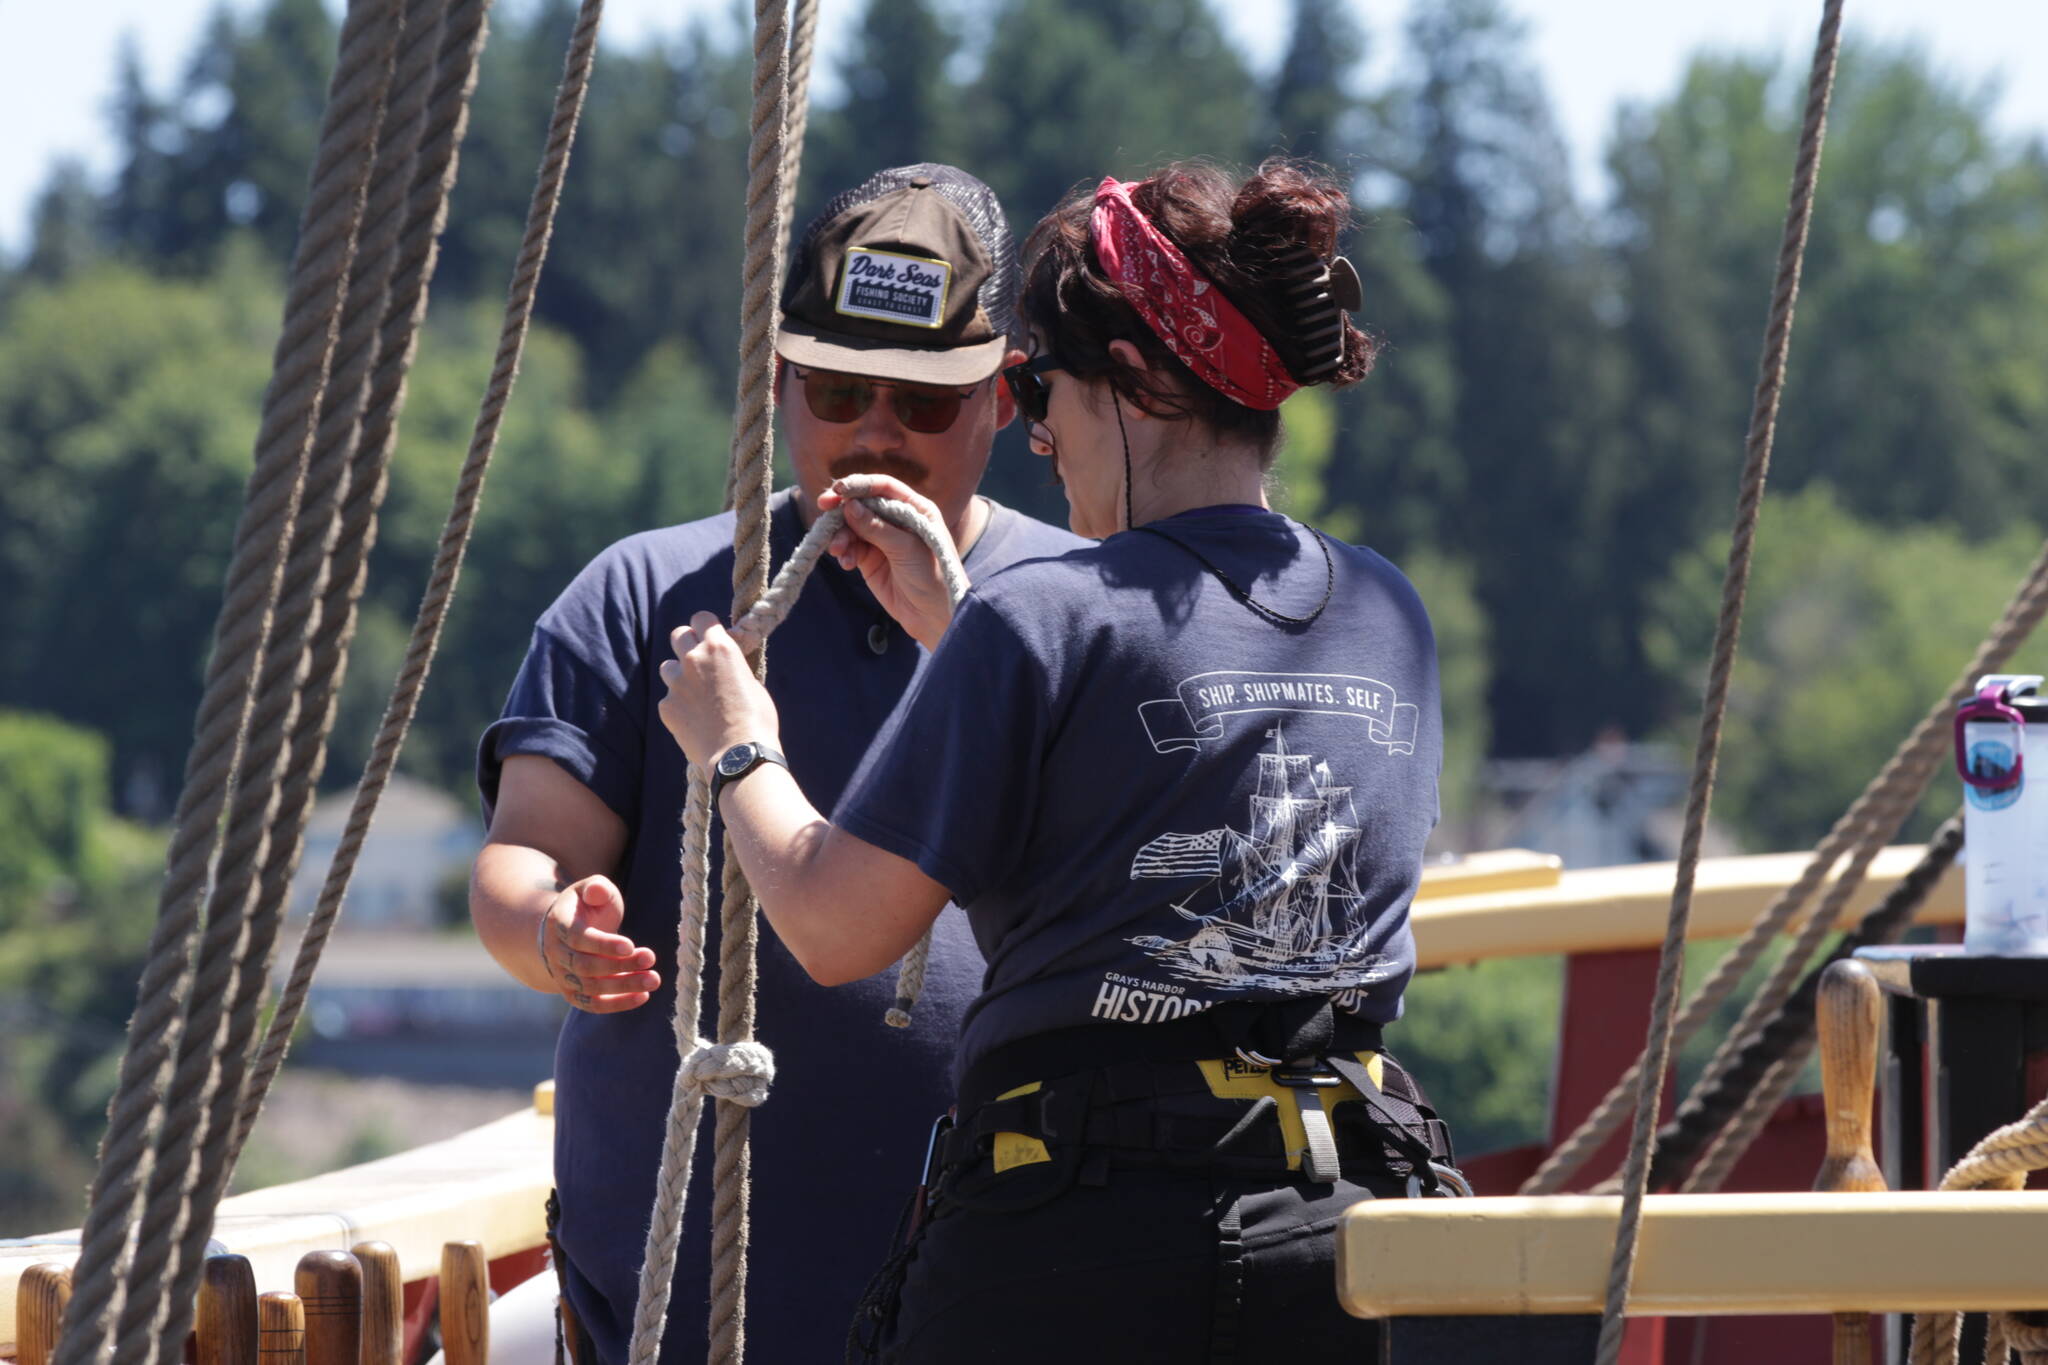 The Lady Washington’s Chief Mate James Hsu, left, works with Marijo Gauthier-Bérubé as she takes part of a program where nautical archaeology graduate students familiarize themselves with practical sailing aboard the Lady Washington. (Michael S. Lockett / The Daily World)